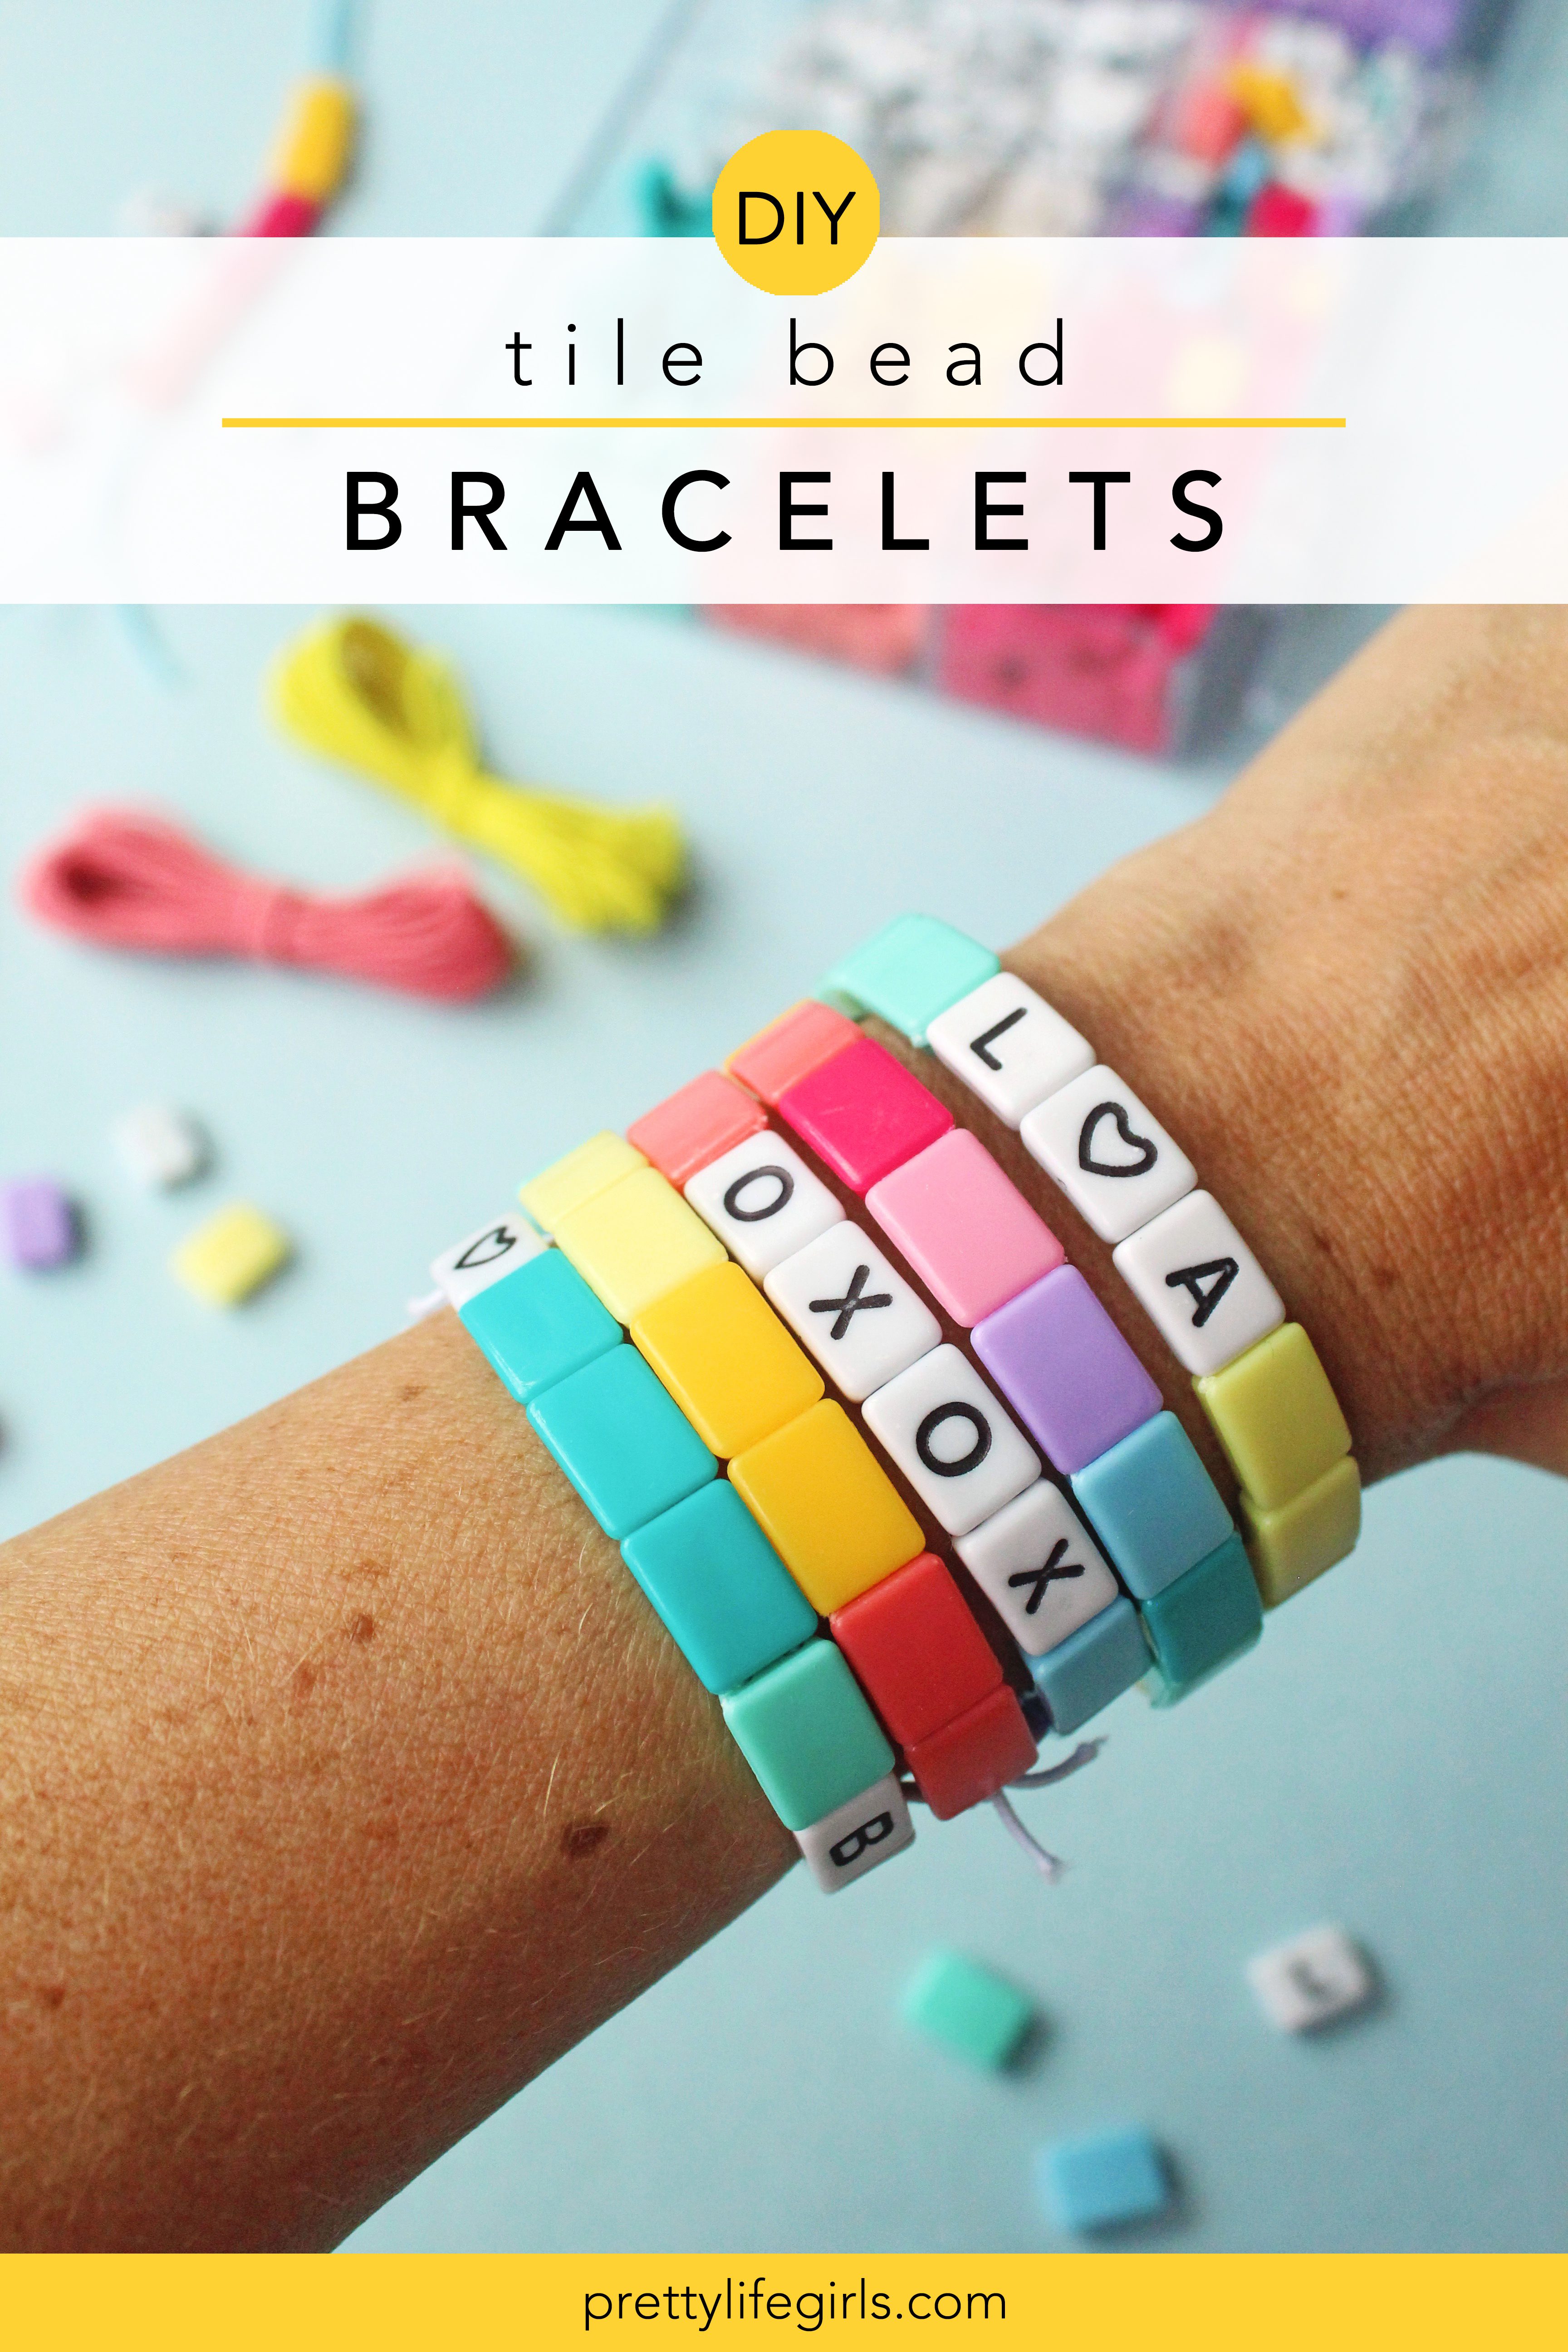 DIY Tile Bead Bracelets + a tutorial featured by Top US Craft Blog + The Pretty Life Girls